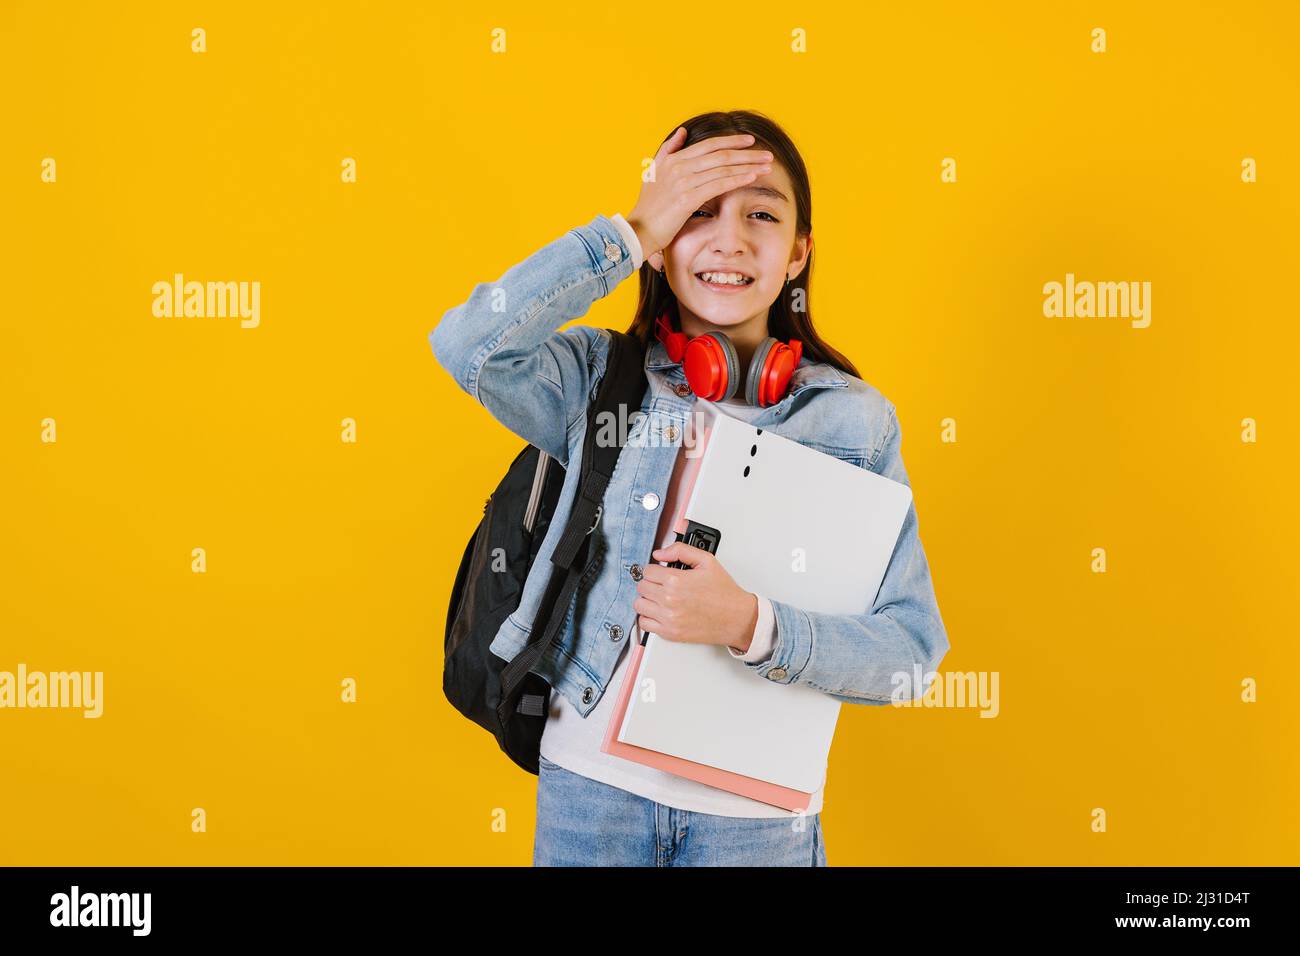 portrait of young hispanic child teen girl student with worried expression on a yellow background in Mexico Latin America Stock Photo